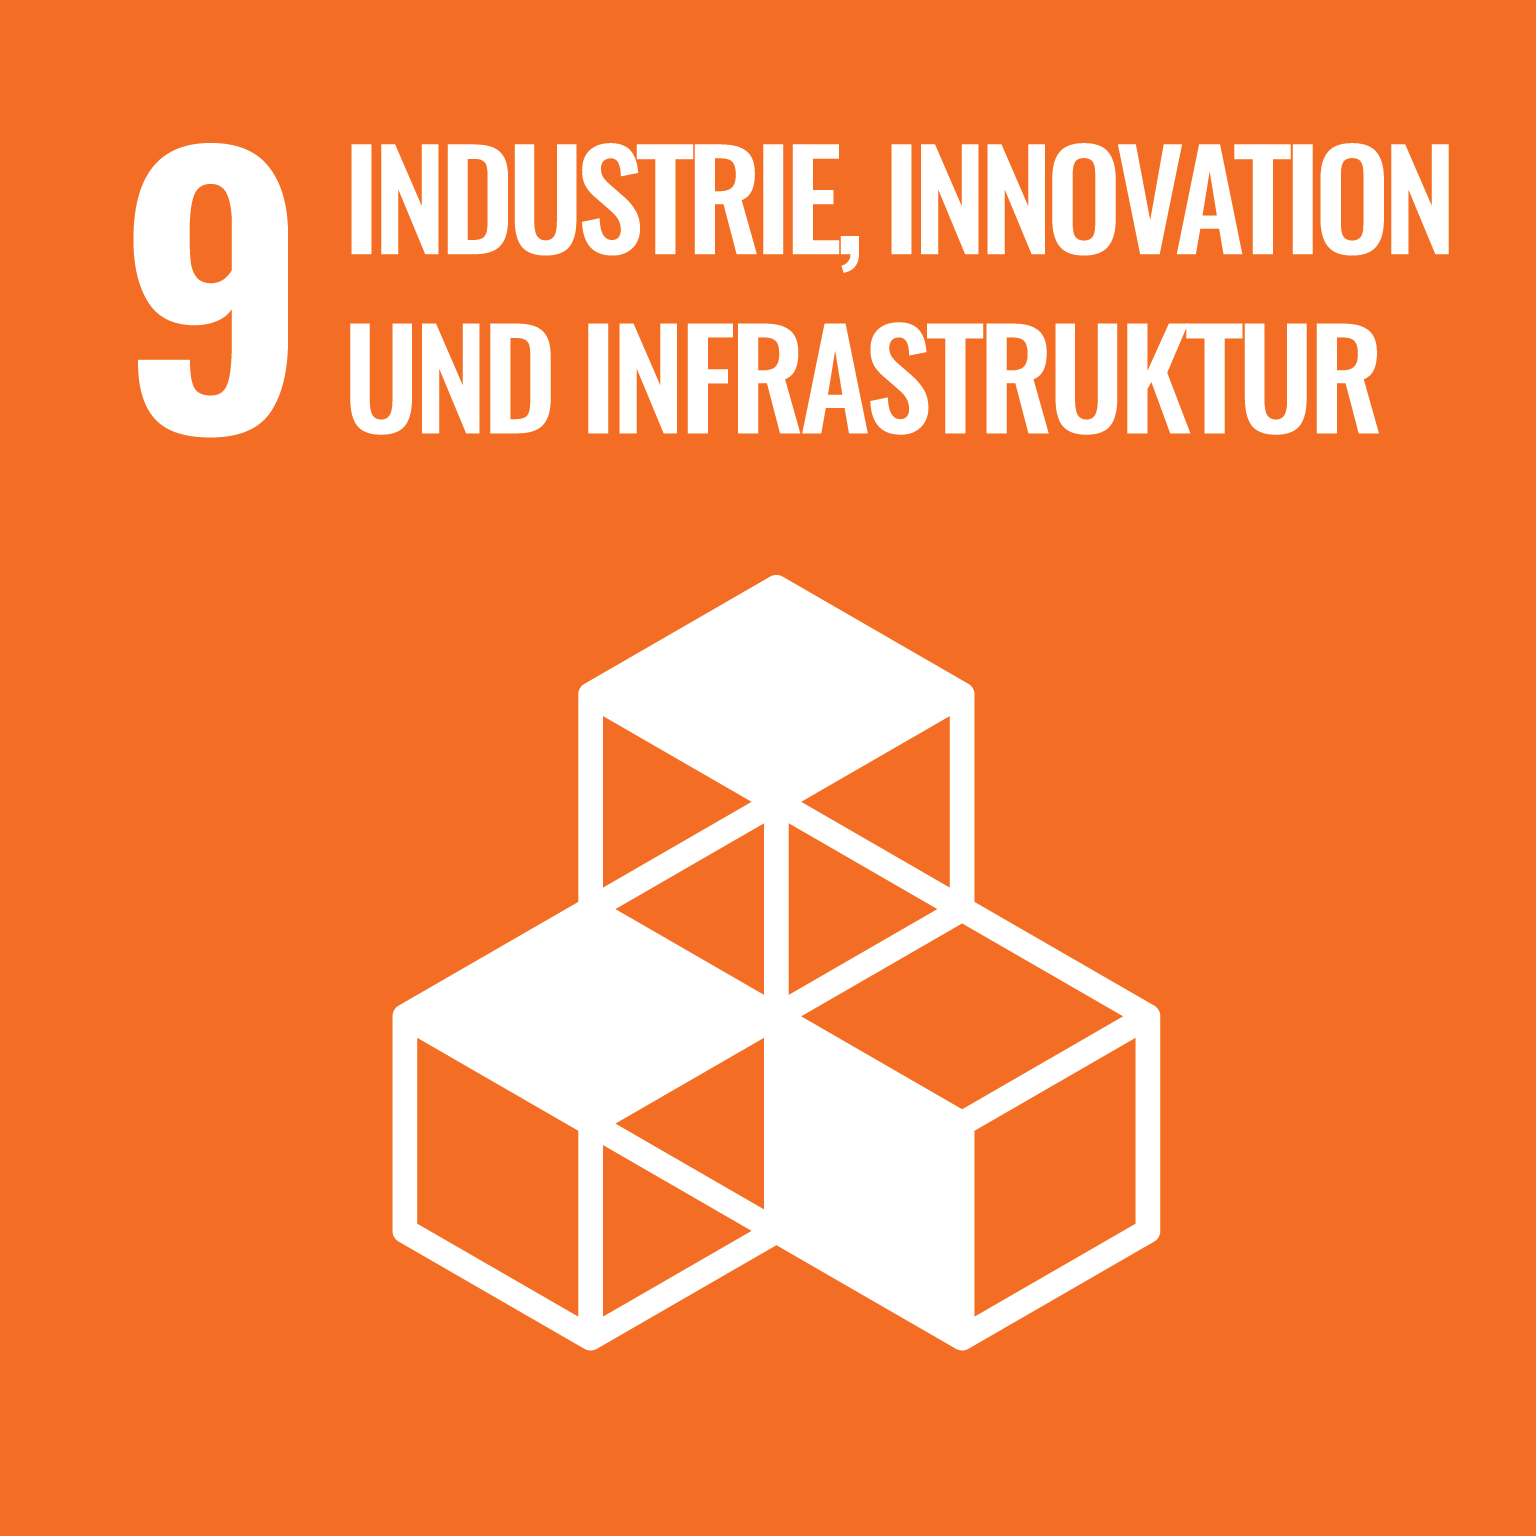 Industry Innovation and Infrastructur